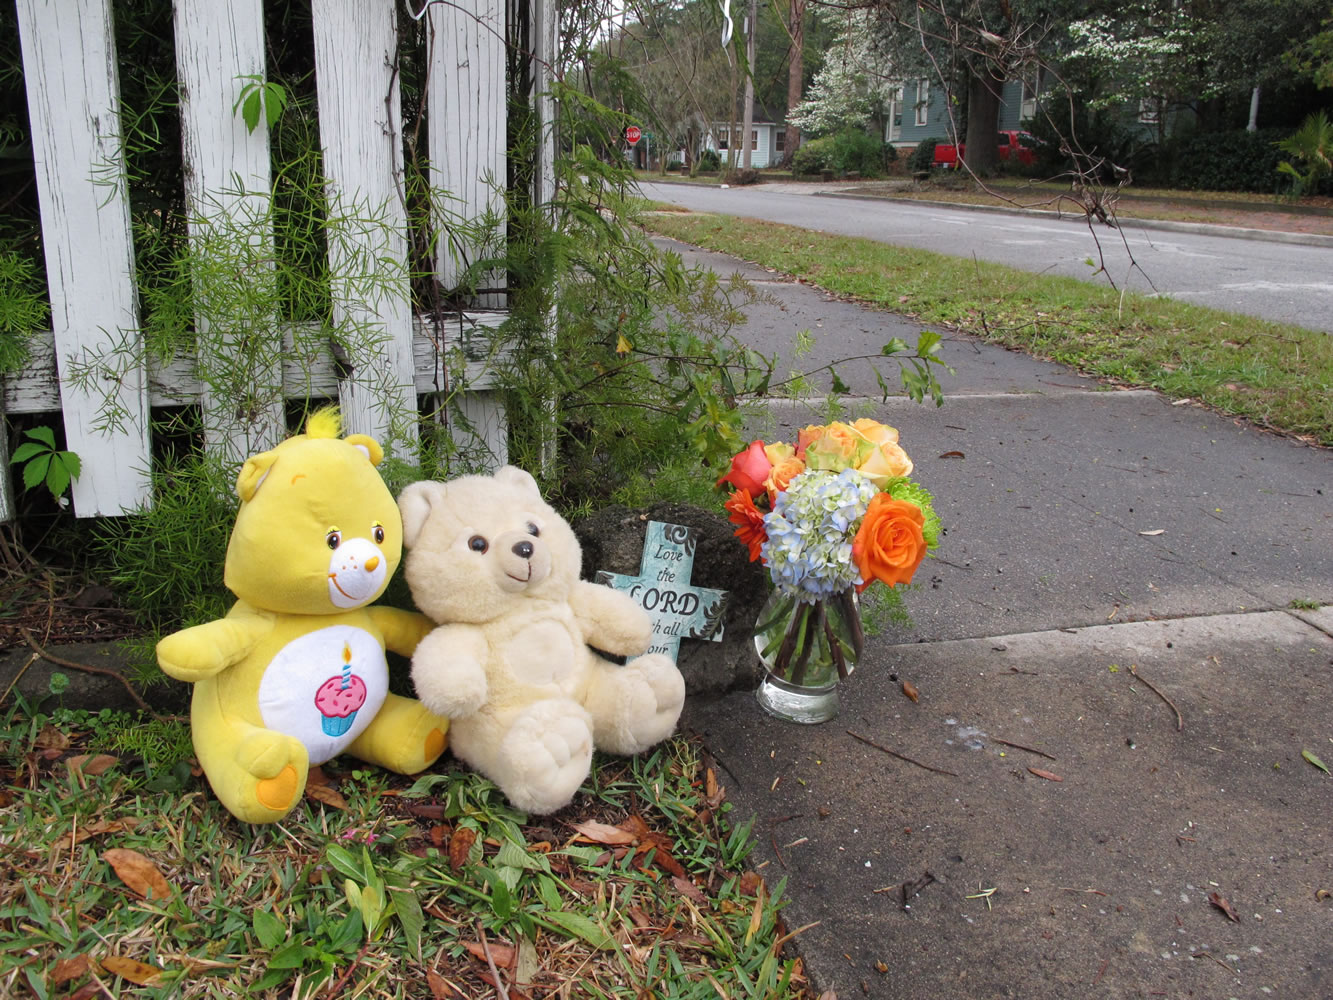 Two teddy bears, a commemorative cross and a vase of flowers sit on a street corner in Brunswick, Ga. on Saturday near where a 13-month-old baby was fatally shot in his stroller two days earlier.